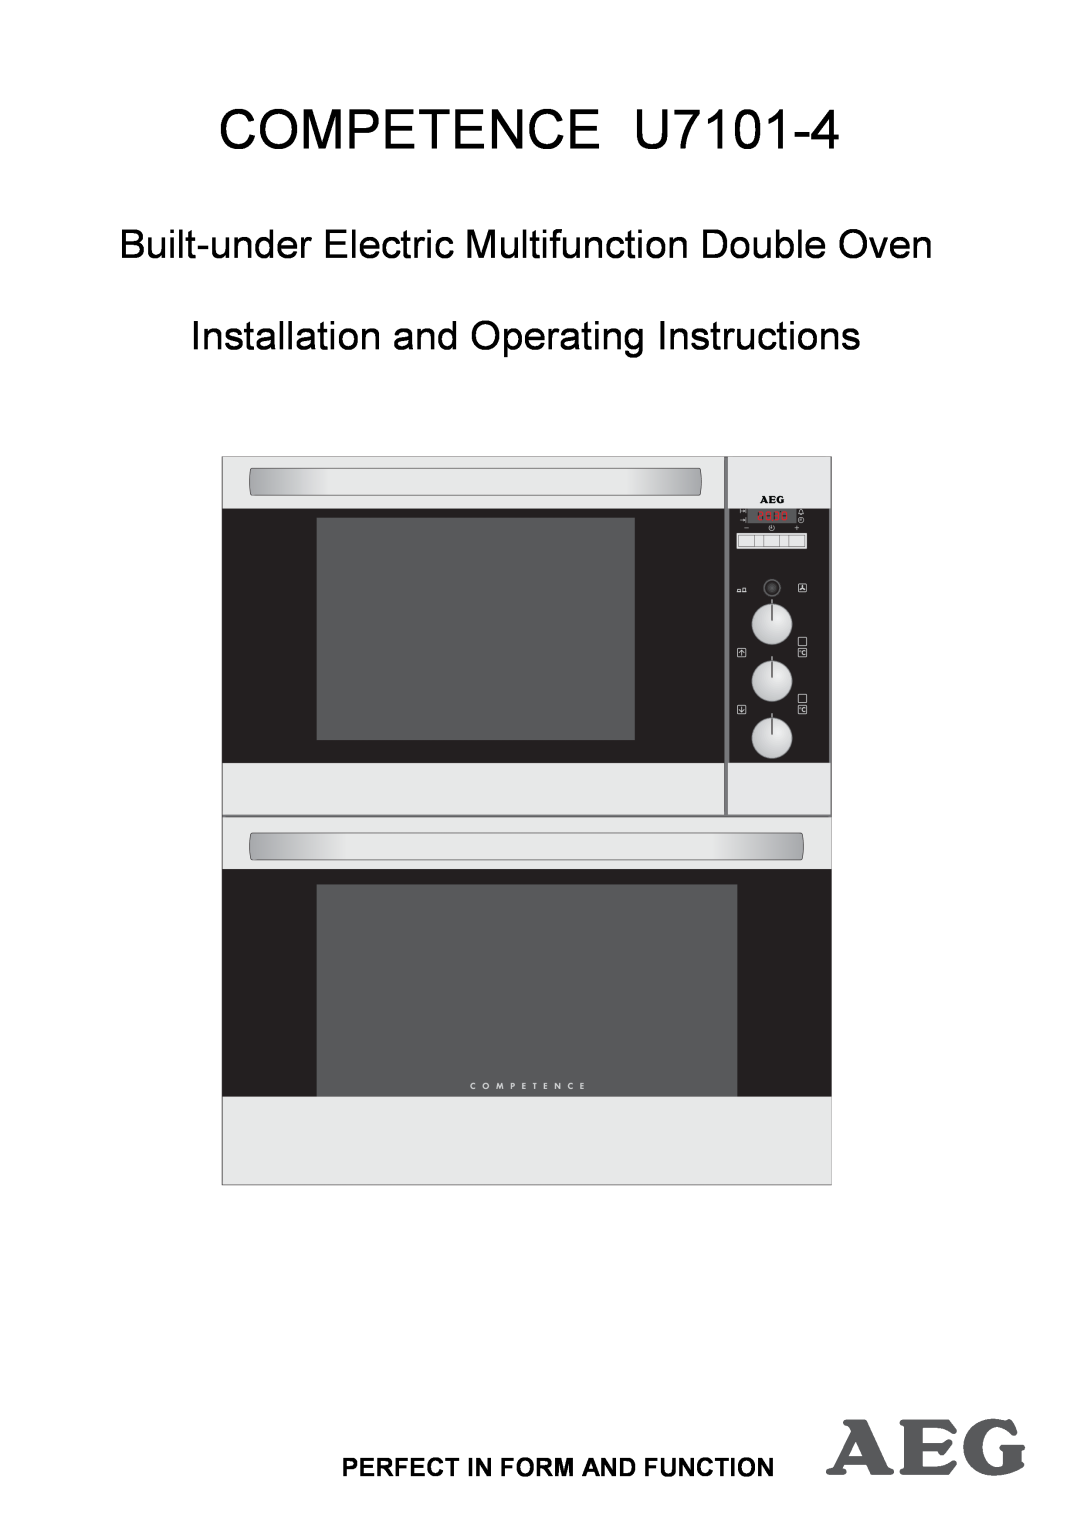 AEG 311704300 manual Perfect In Form And Function, COMPETENCE U7101-4, Built-underElectric Multifunction Double Oven 